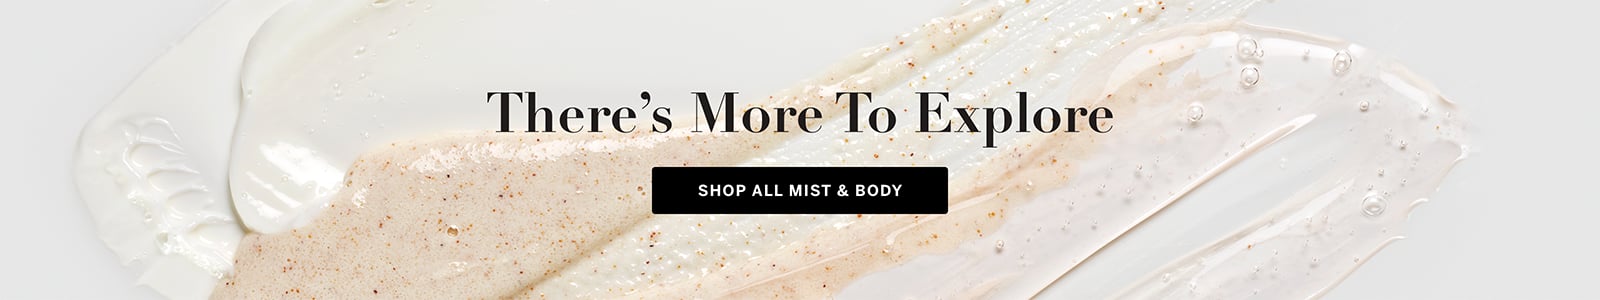 There is More to Explore. Shop All Mist and Body.